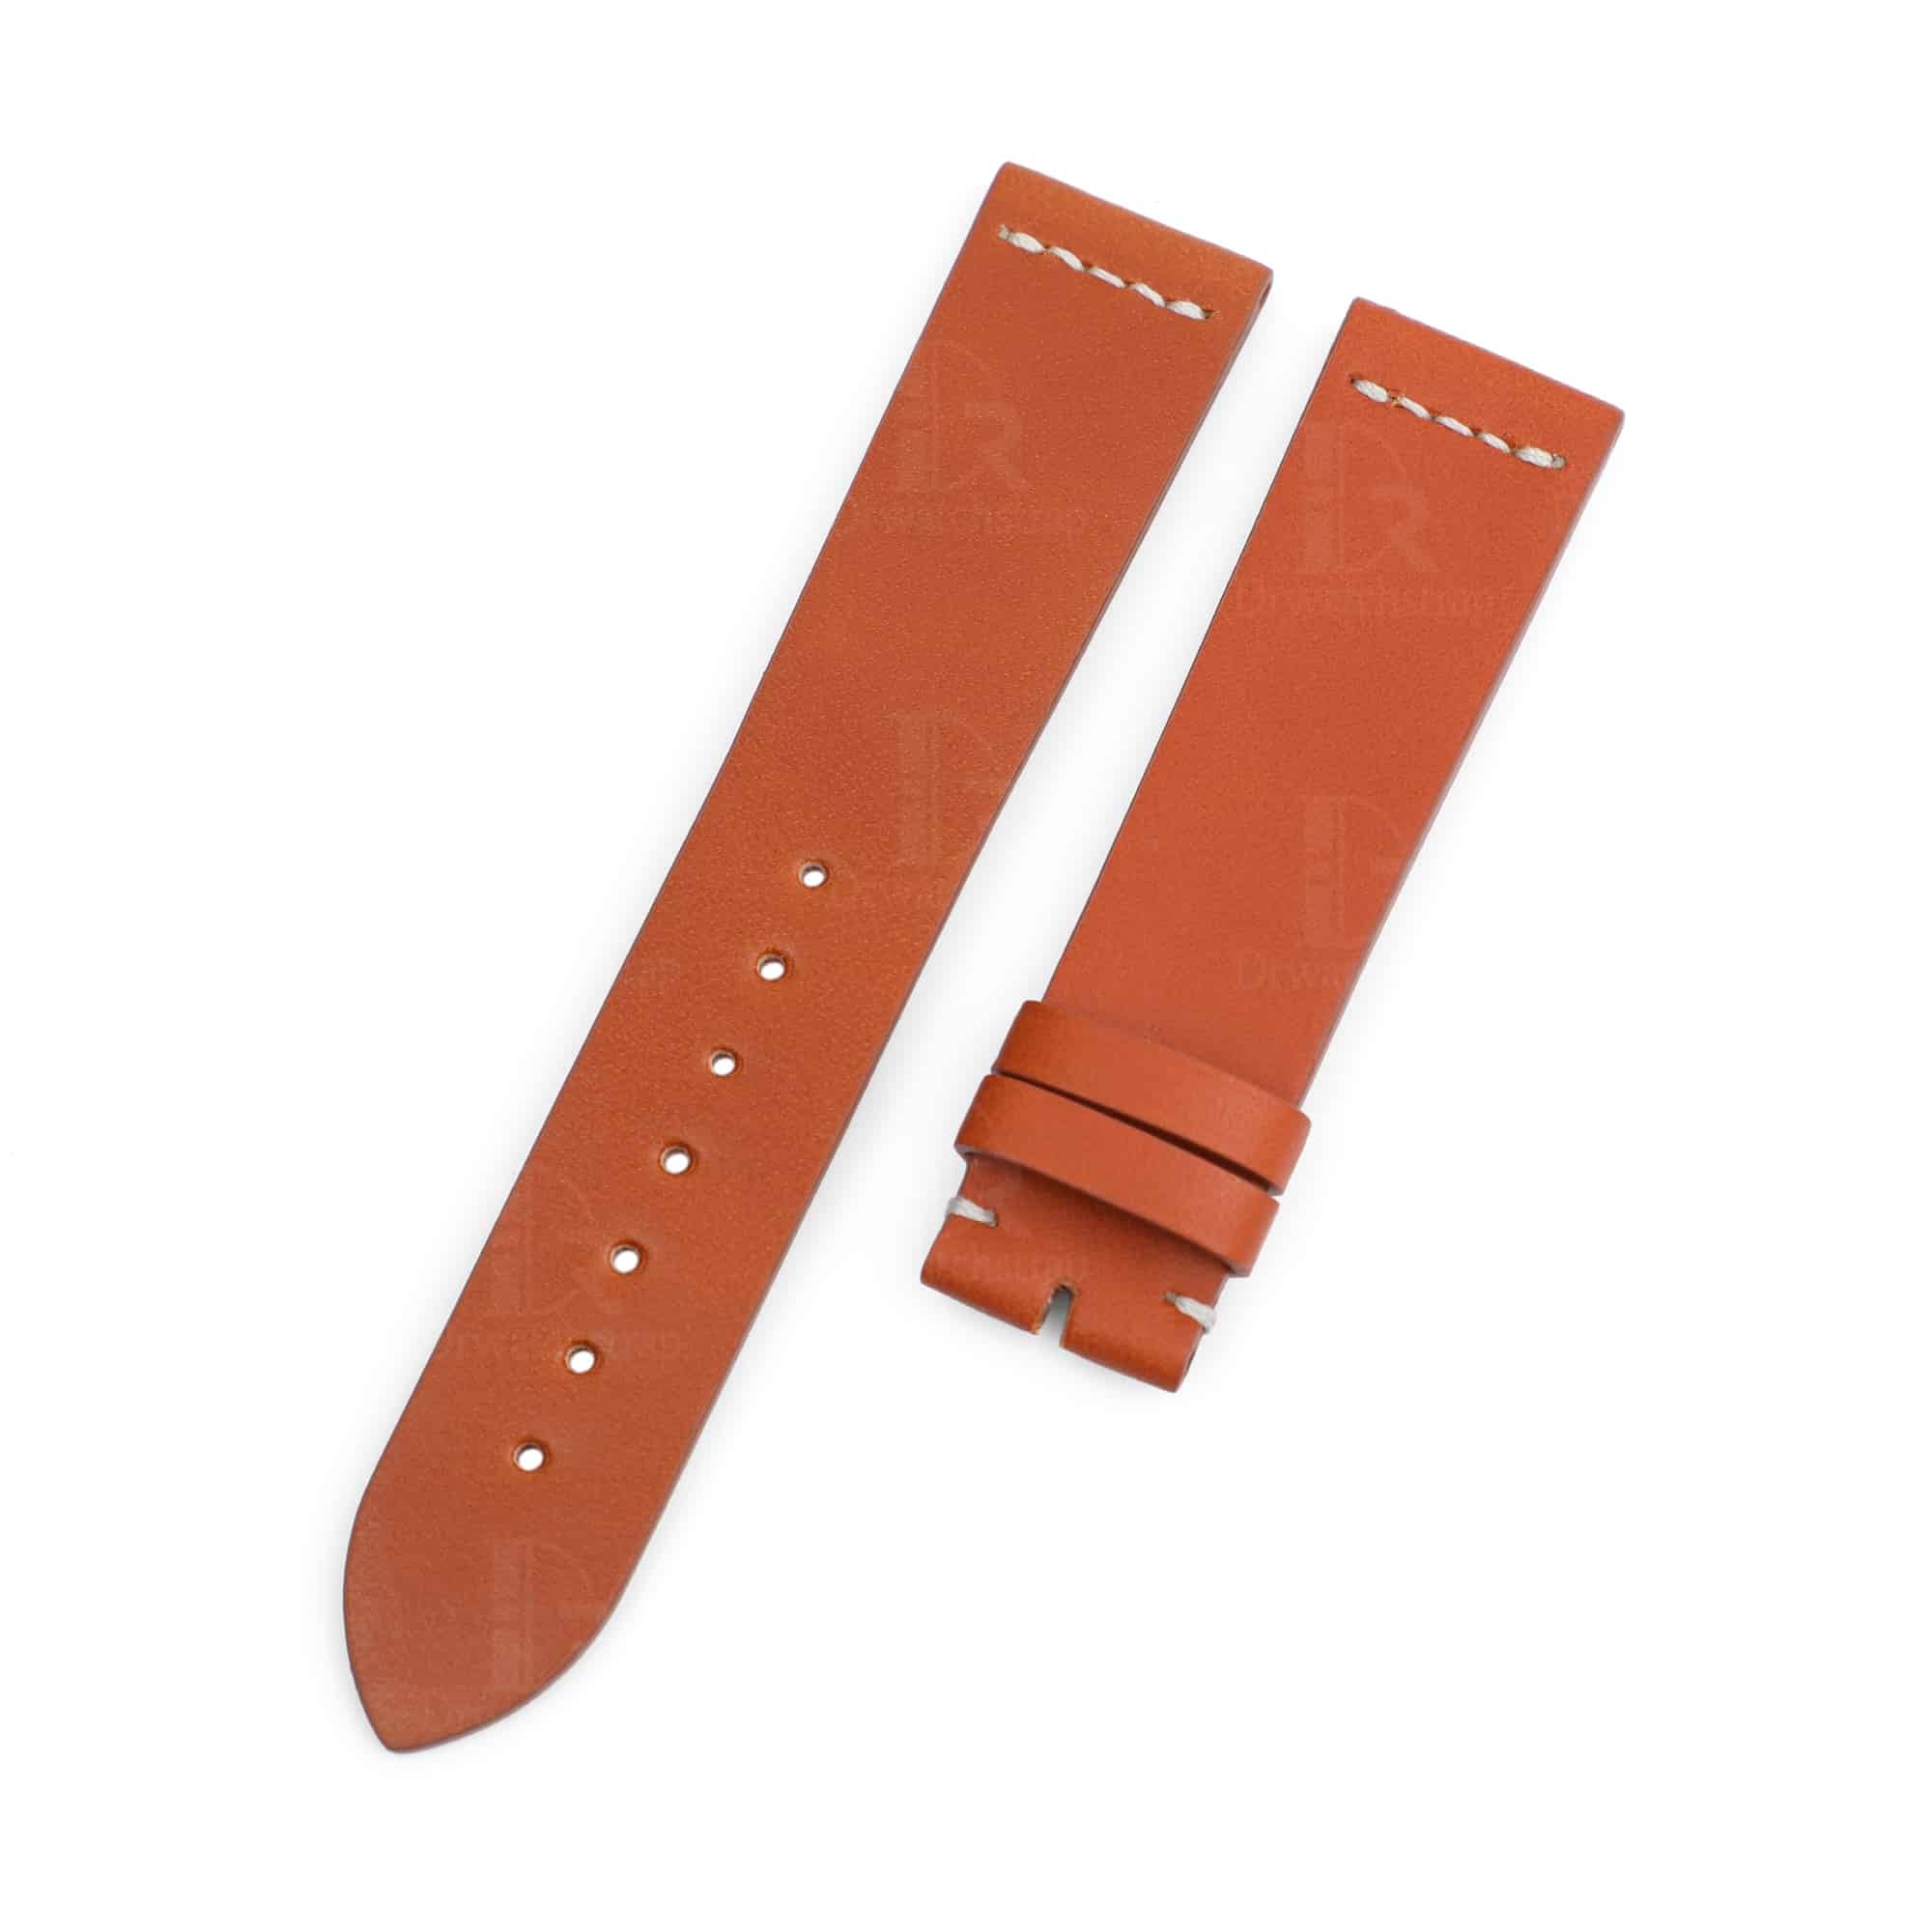 Buy OEM custom leather watch bands from China maker Orange oyster perpetual leather strap discount price